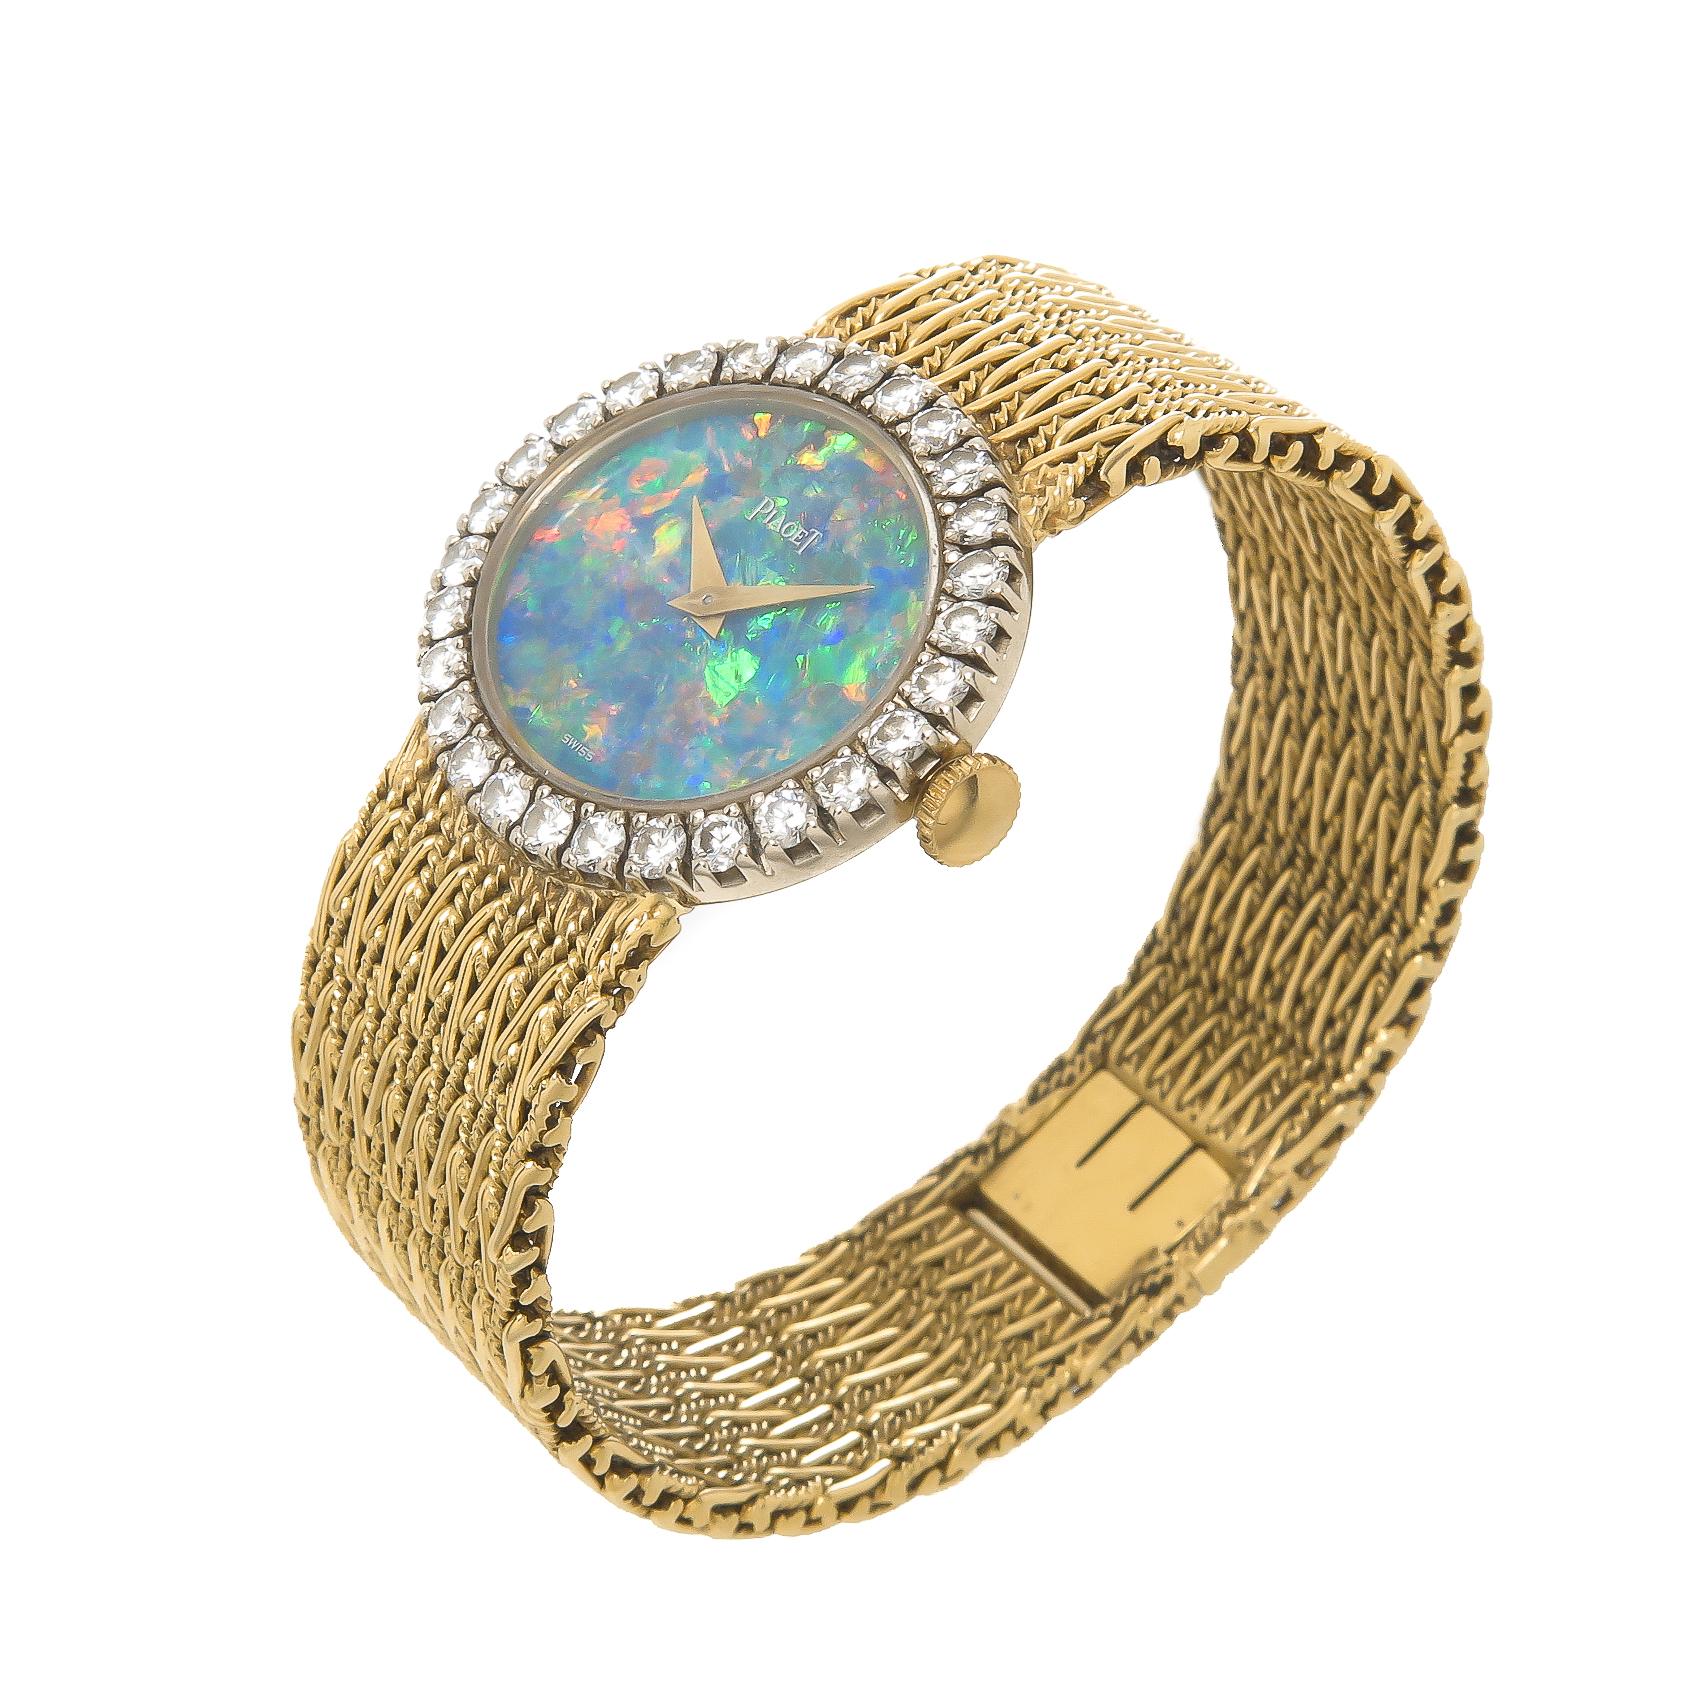 Circa 1980 Piaget Ladies Wrist watch, 27 X 24 MM 2 piece 18K Yellow Gold case. Piaget factory set Diamond bezel of round Brilliant cuts totaling 1 carat. 17 jewel mechanical, manual wind movement.  Boulder Opal dial with strong colors of Blue, Green